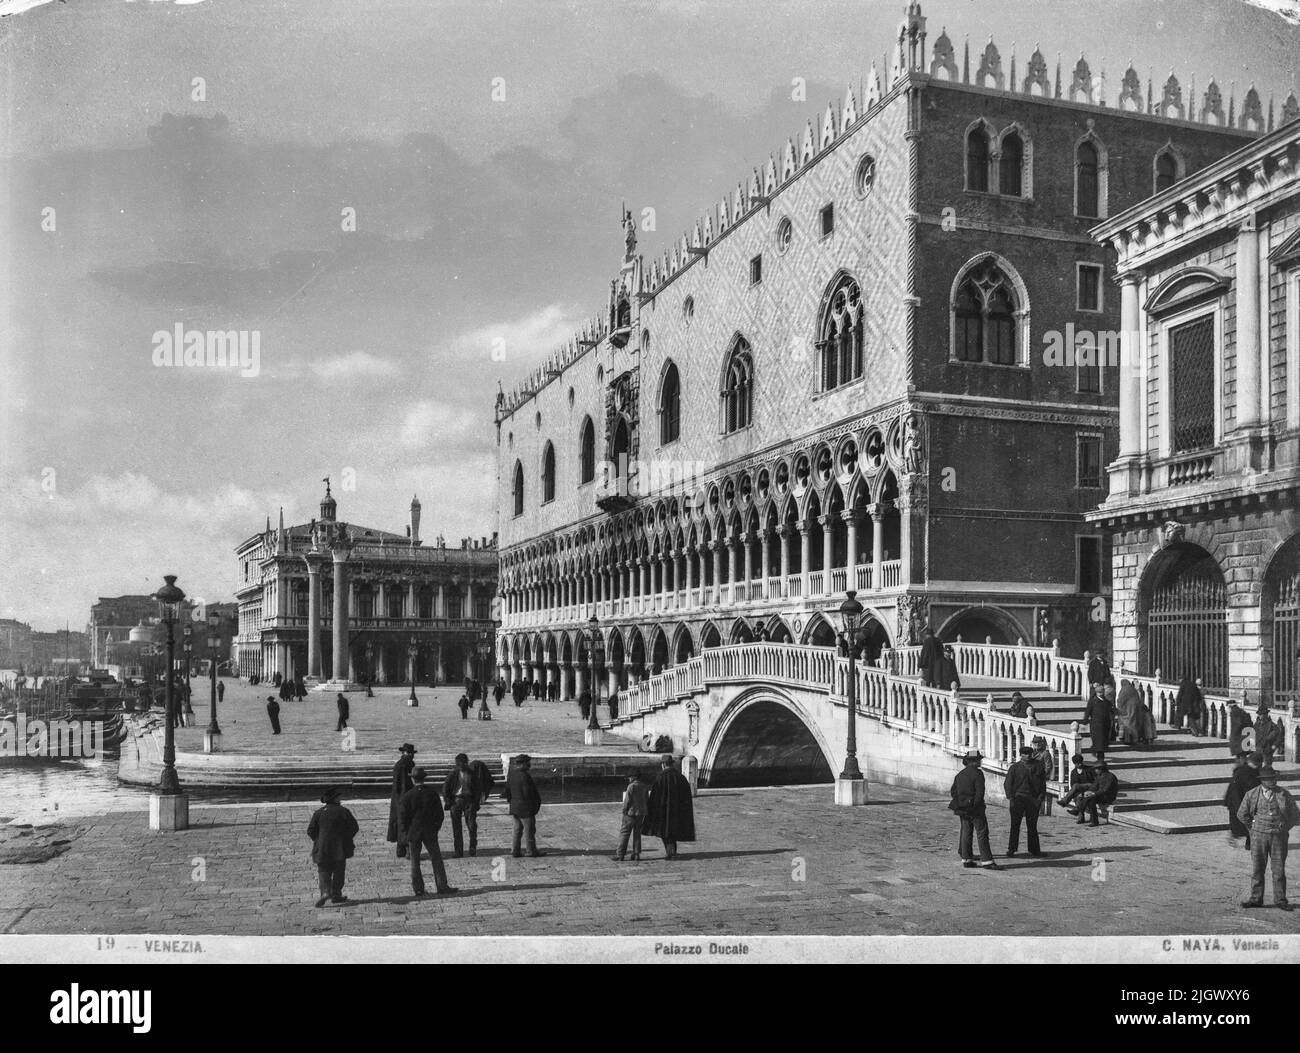 View of the Ducale palace made by Carlo Naya between 1868 and 1882. The historical archive of Naya-Bohm is an archive of 25000 glass plates, now digitalized, of pictures of Venice from 1868 until 1882 (Carlo Naya), and then until 1950 (Bohm). Stock Photo